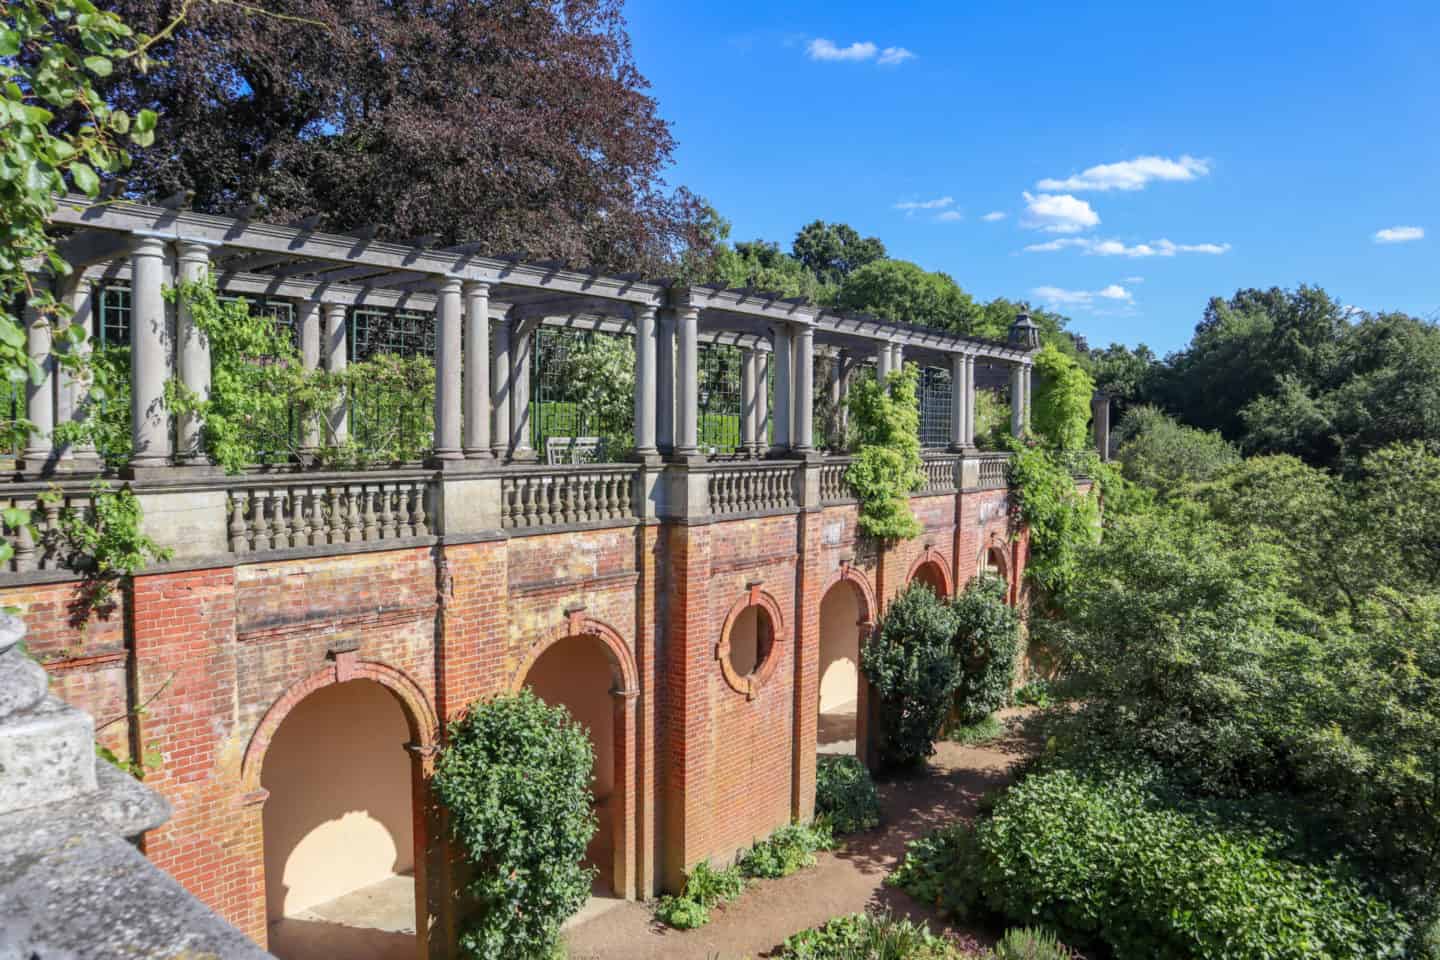 Hampstead Pergola Building and Garden | what to do on Hampstead Heath